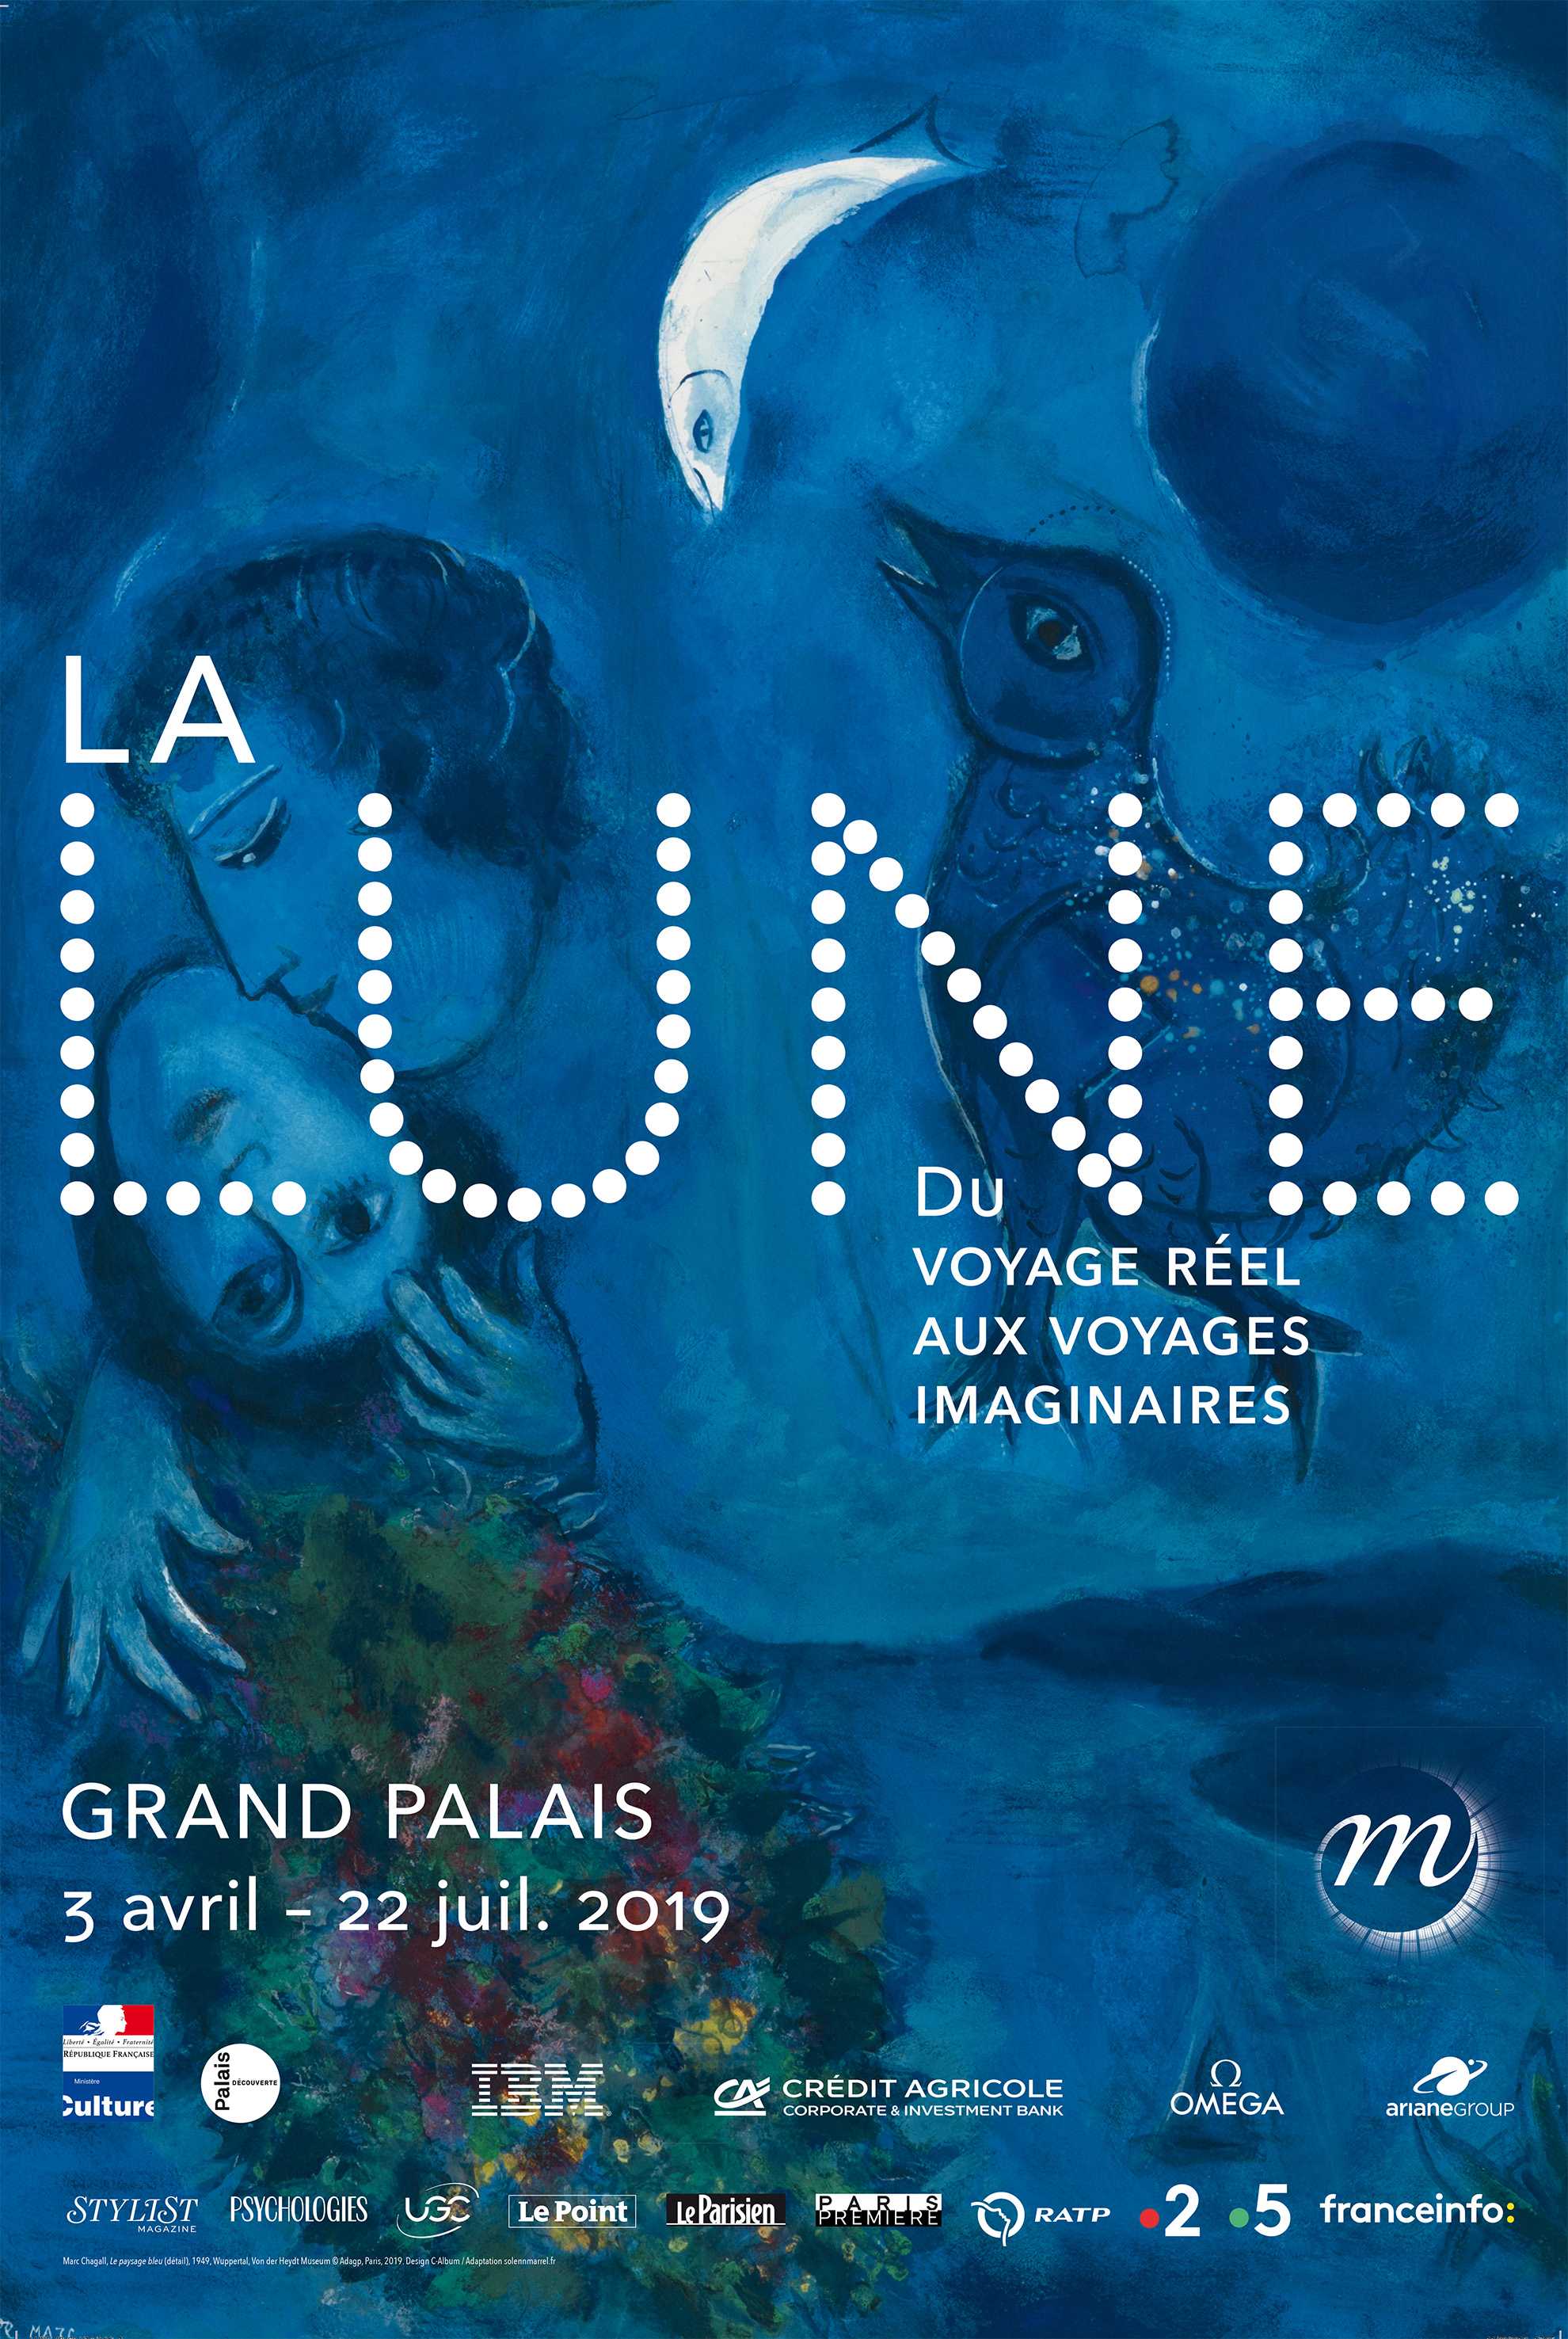 The Moon. From real travel to imaginary journeys, Exhibition, Grand Palais, Paris: 3 April - 22 July 2019